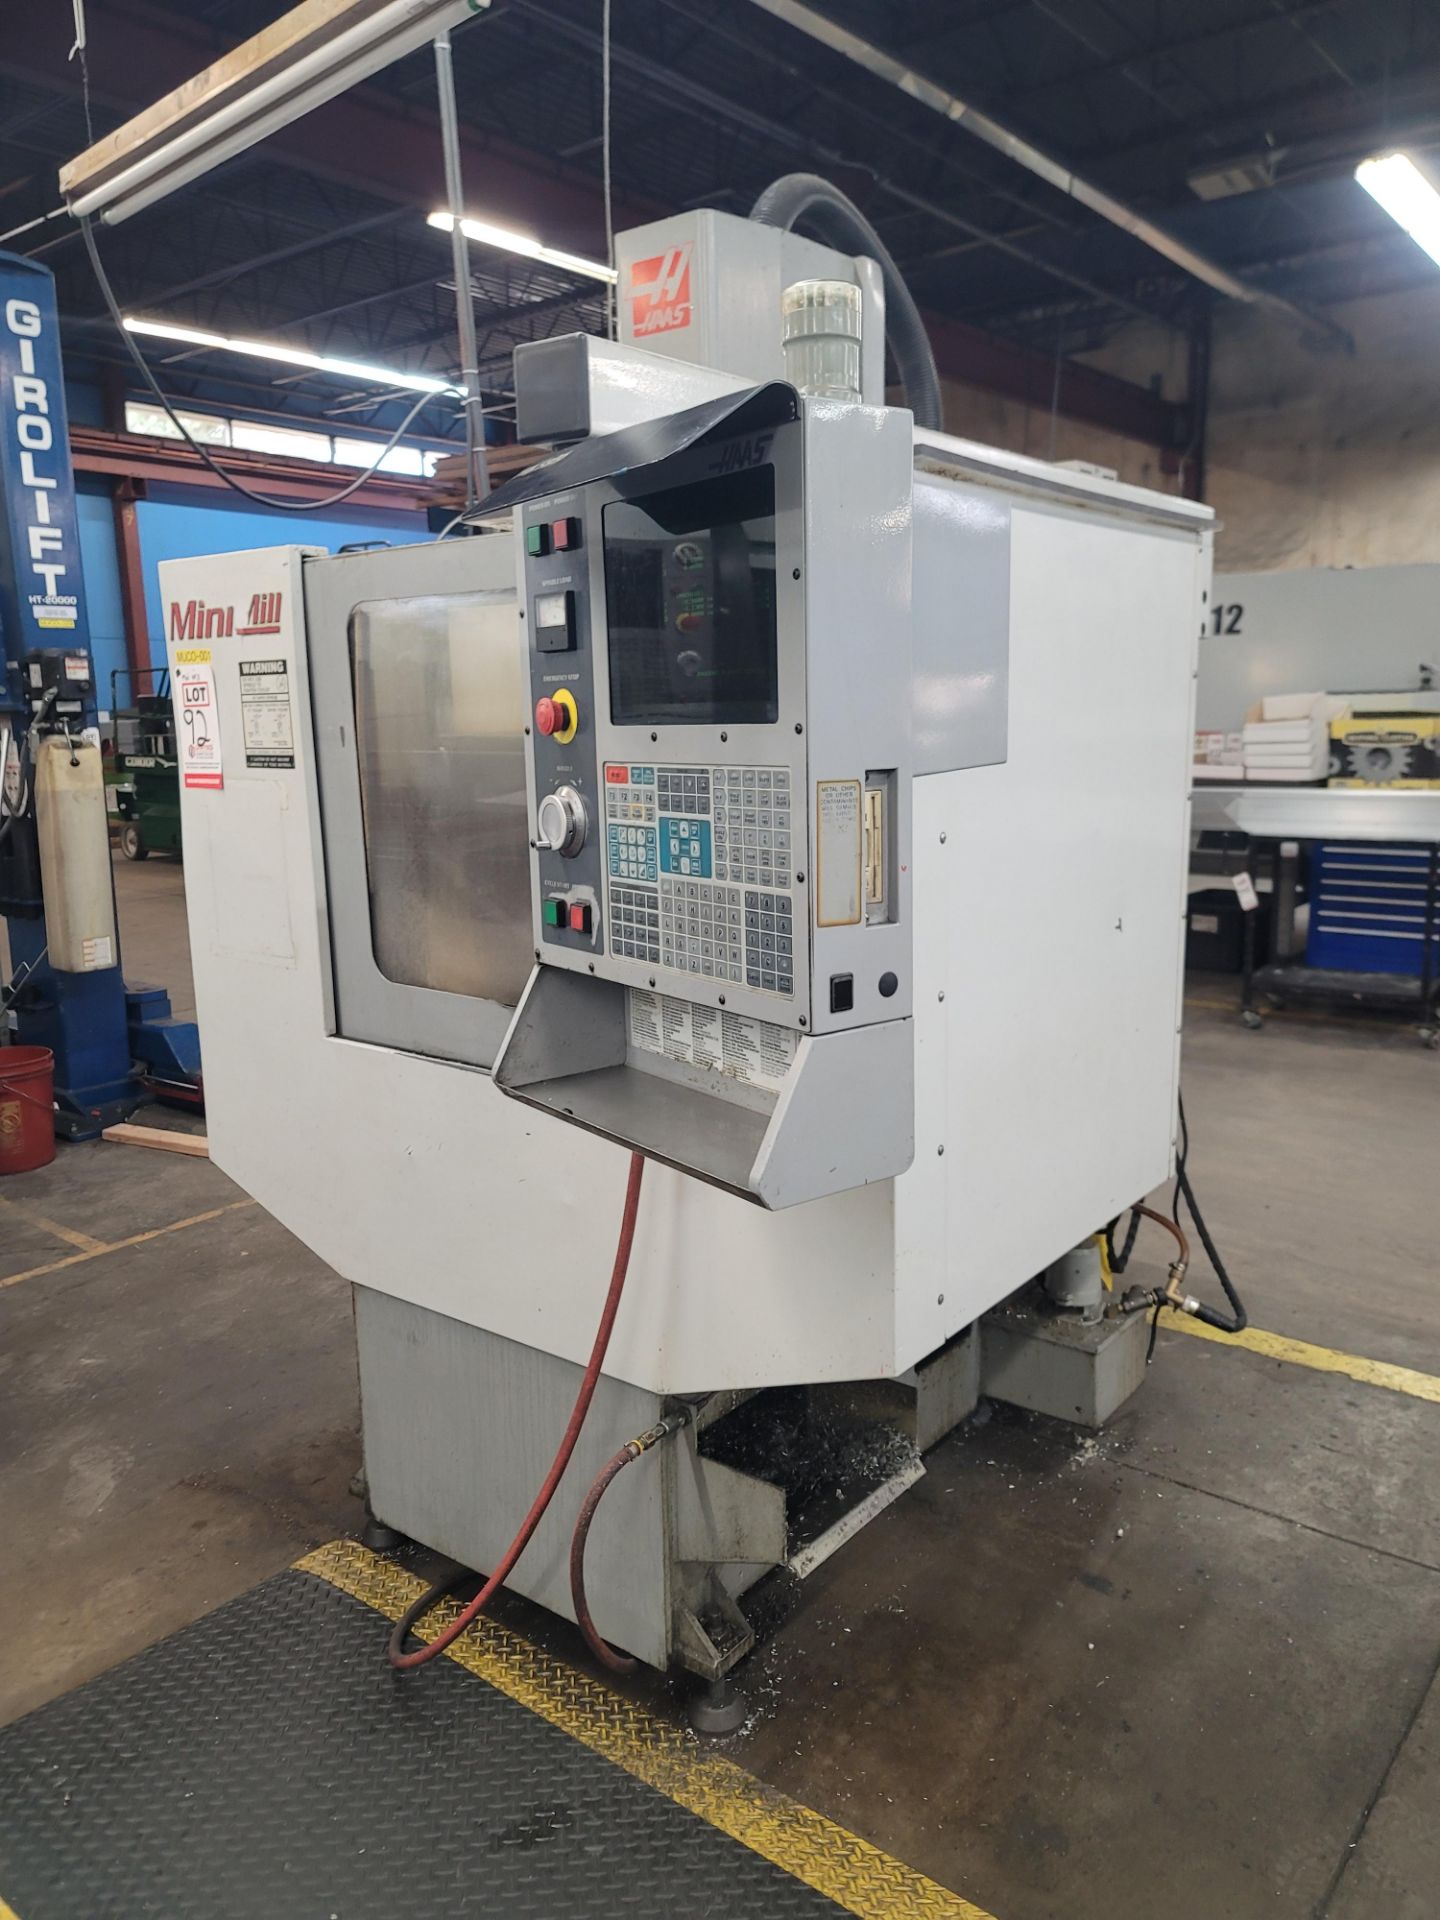 2001 HAAS MINI MILL VERTICAL MACHINING CENTER, XYZ TRAVELS: 16" X 12" X 10", 28" X 12" TABLE, 10- - Image 2 of 11